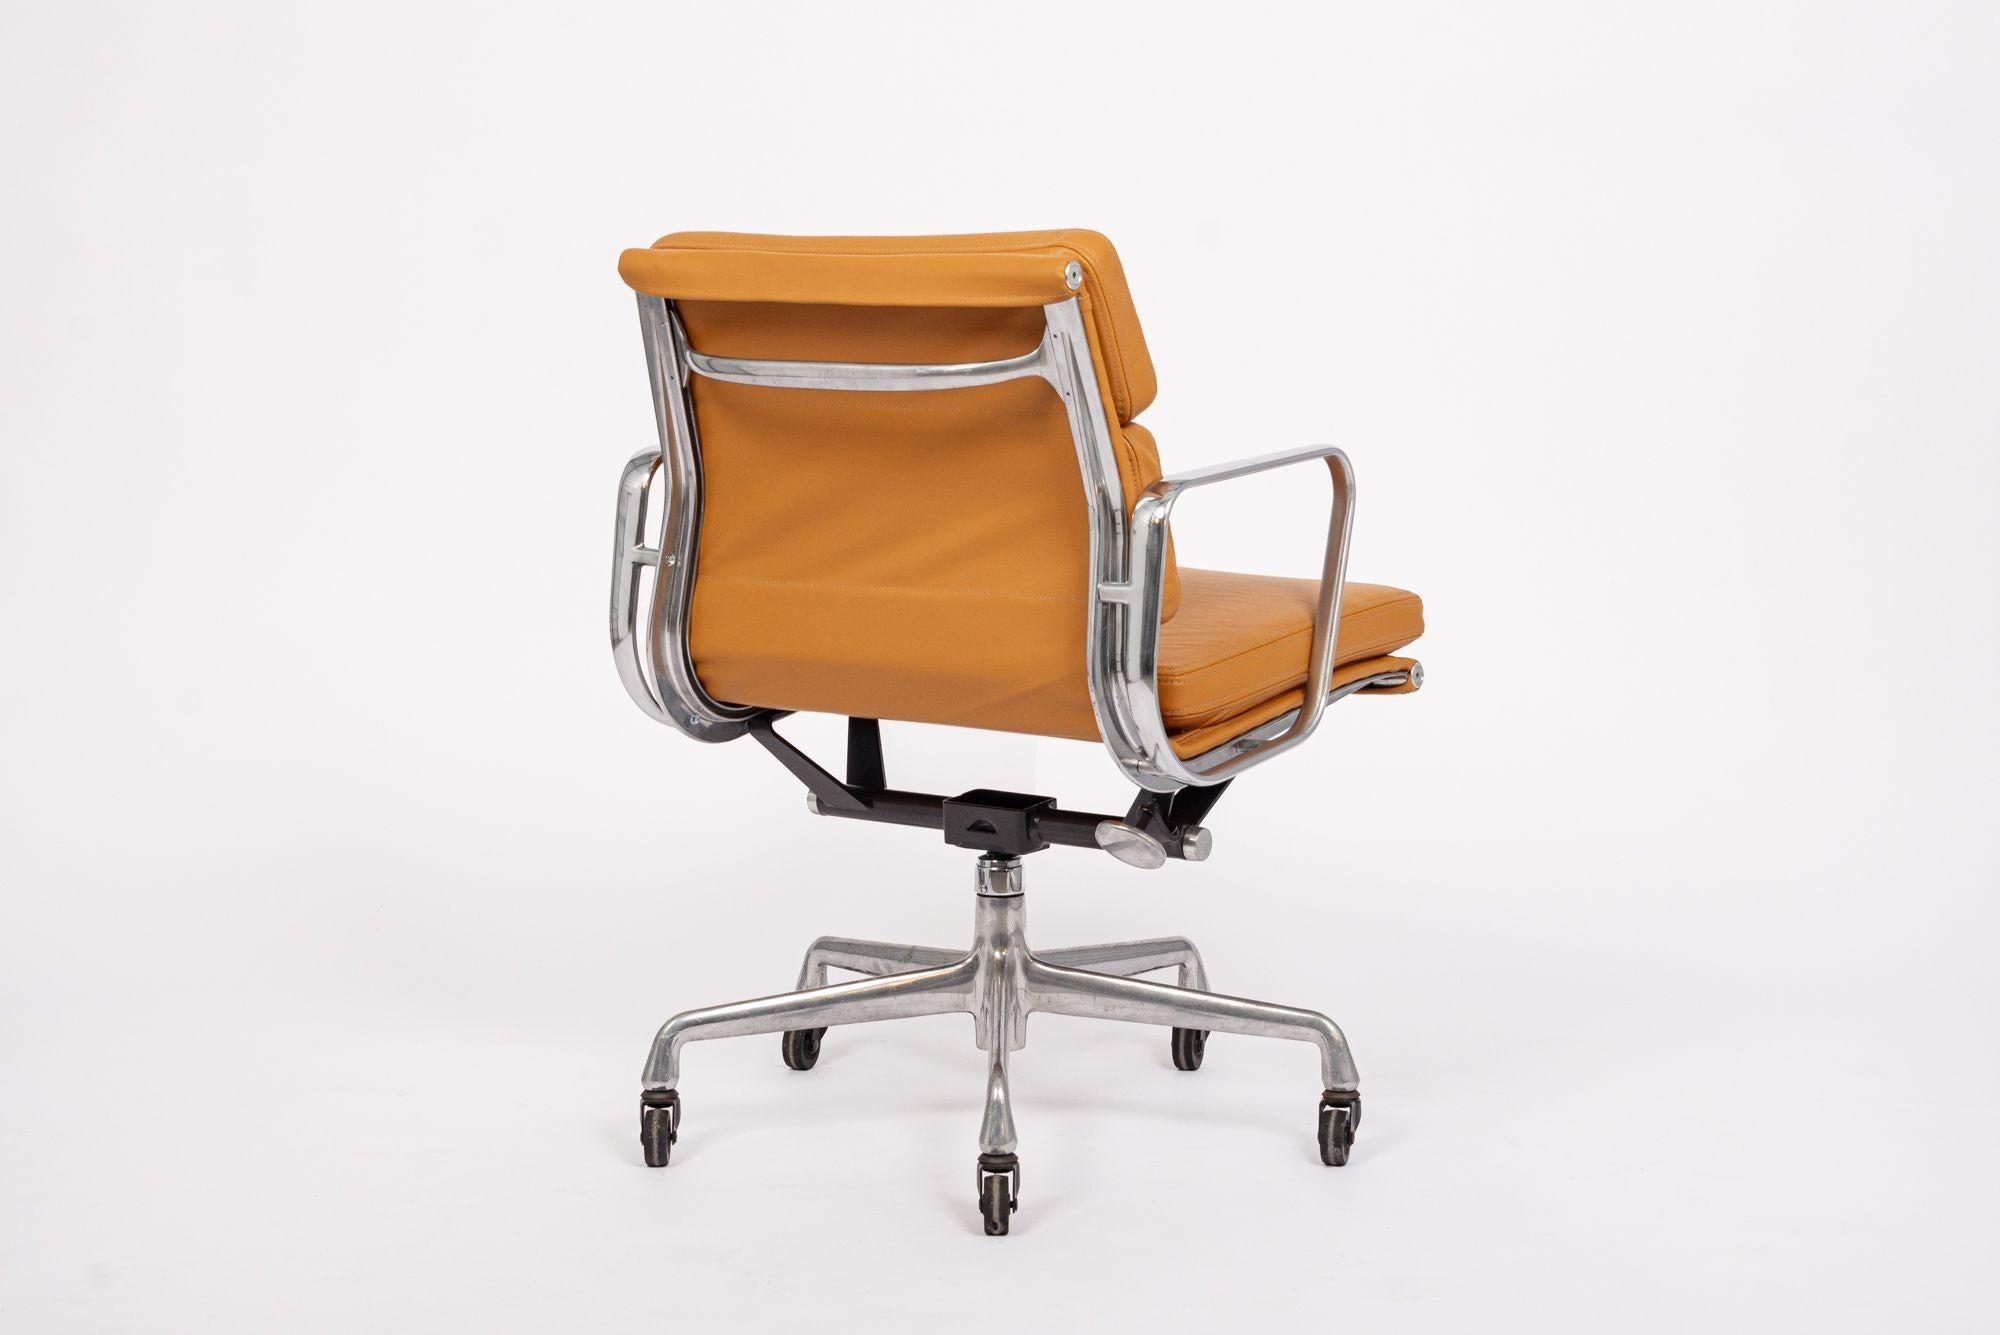 2000s Eames Herman Miller Orange Brown Leather Office Chair Mid Century In Good Condition For Sale In Detroit, MI